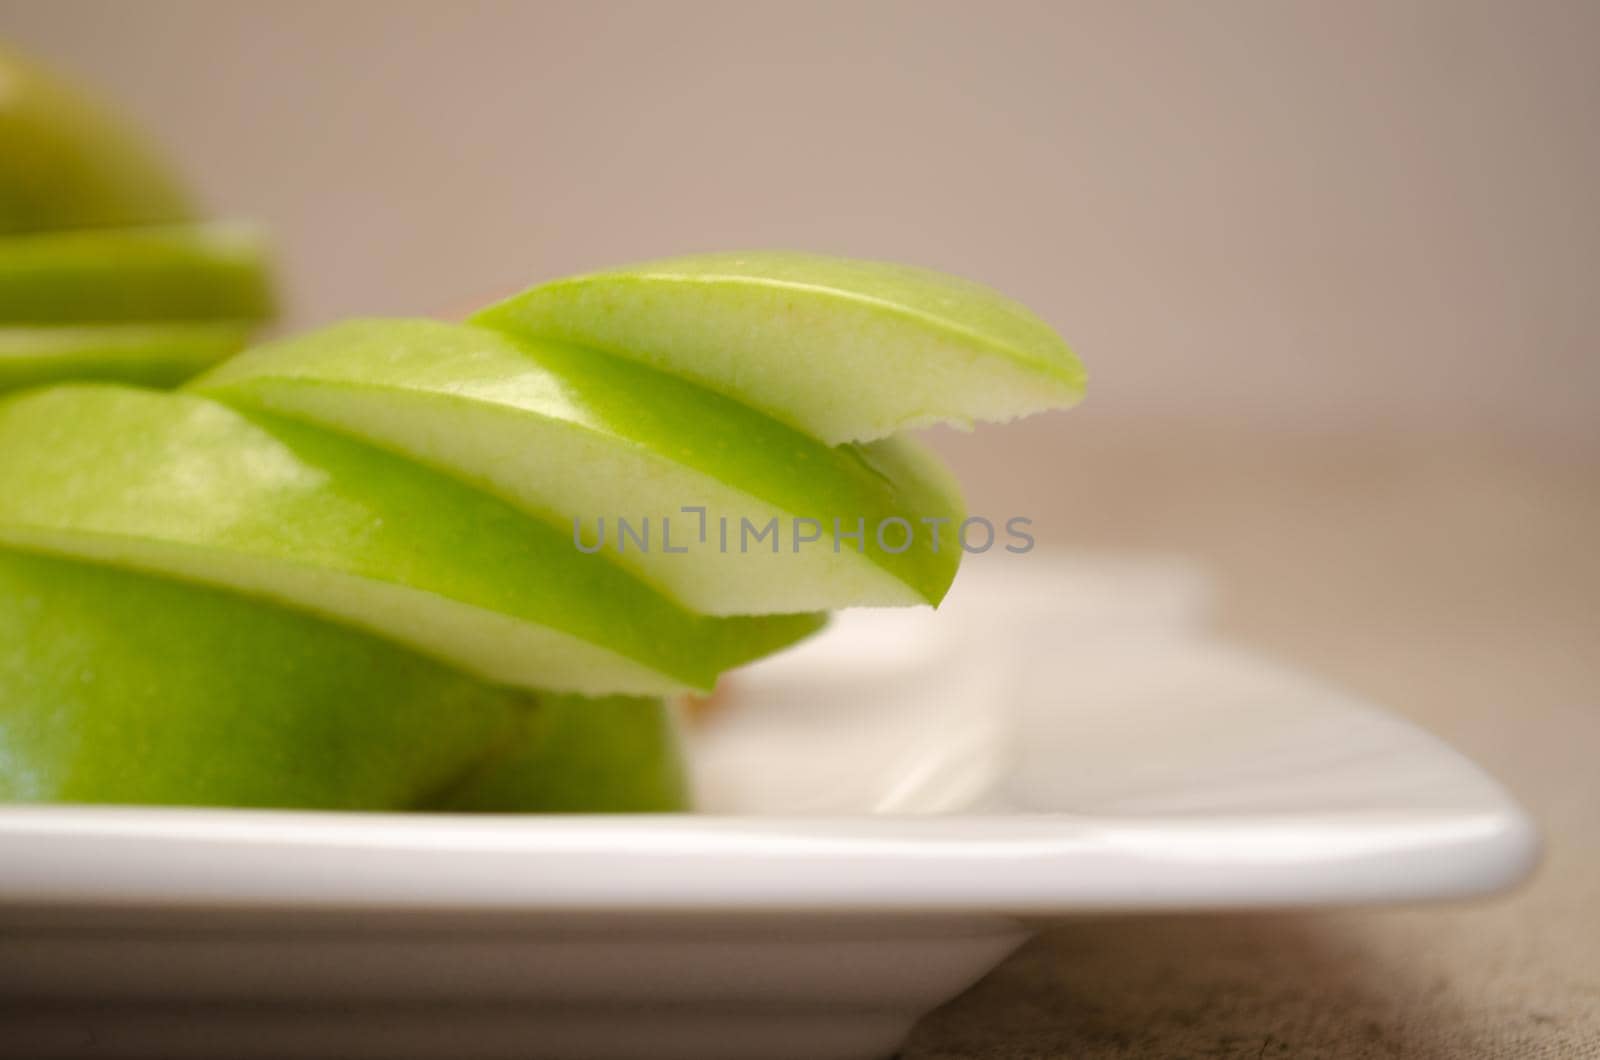 Green sliced apples by Proff